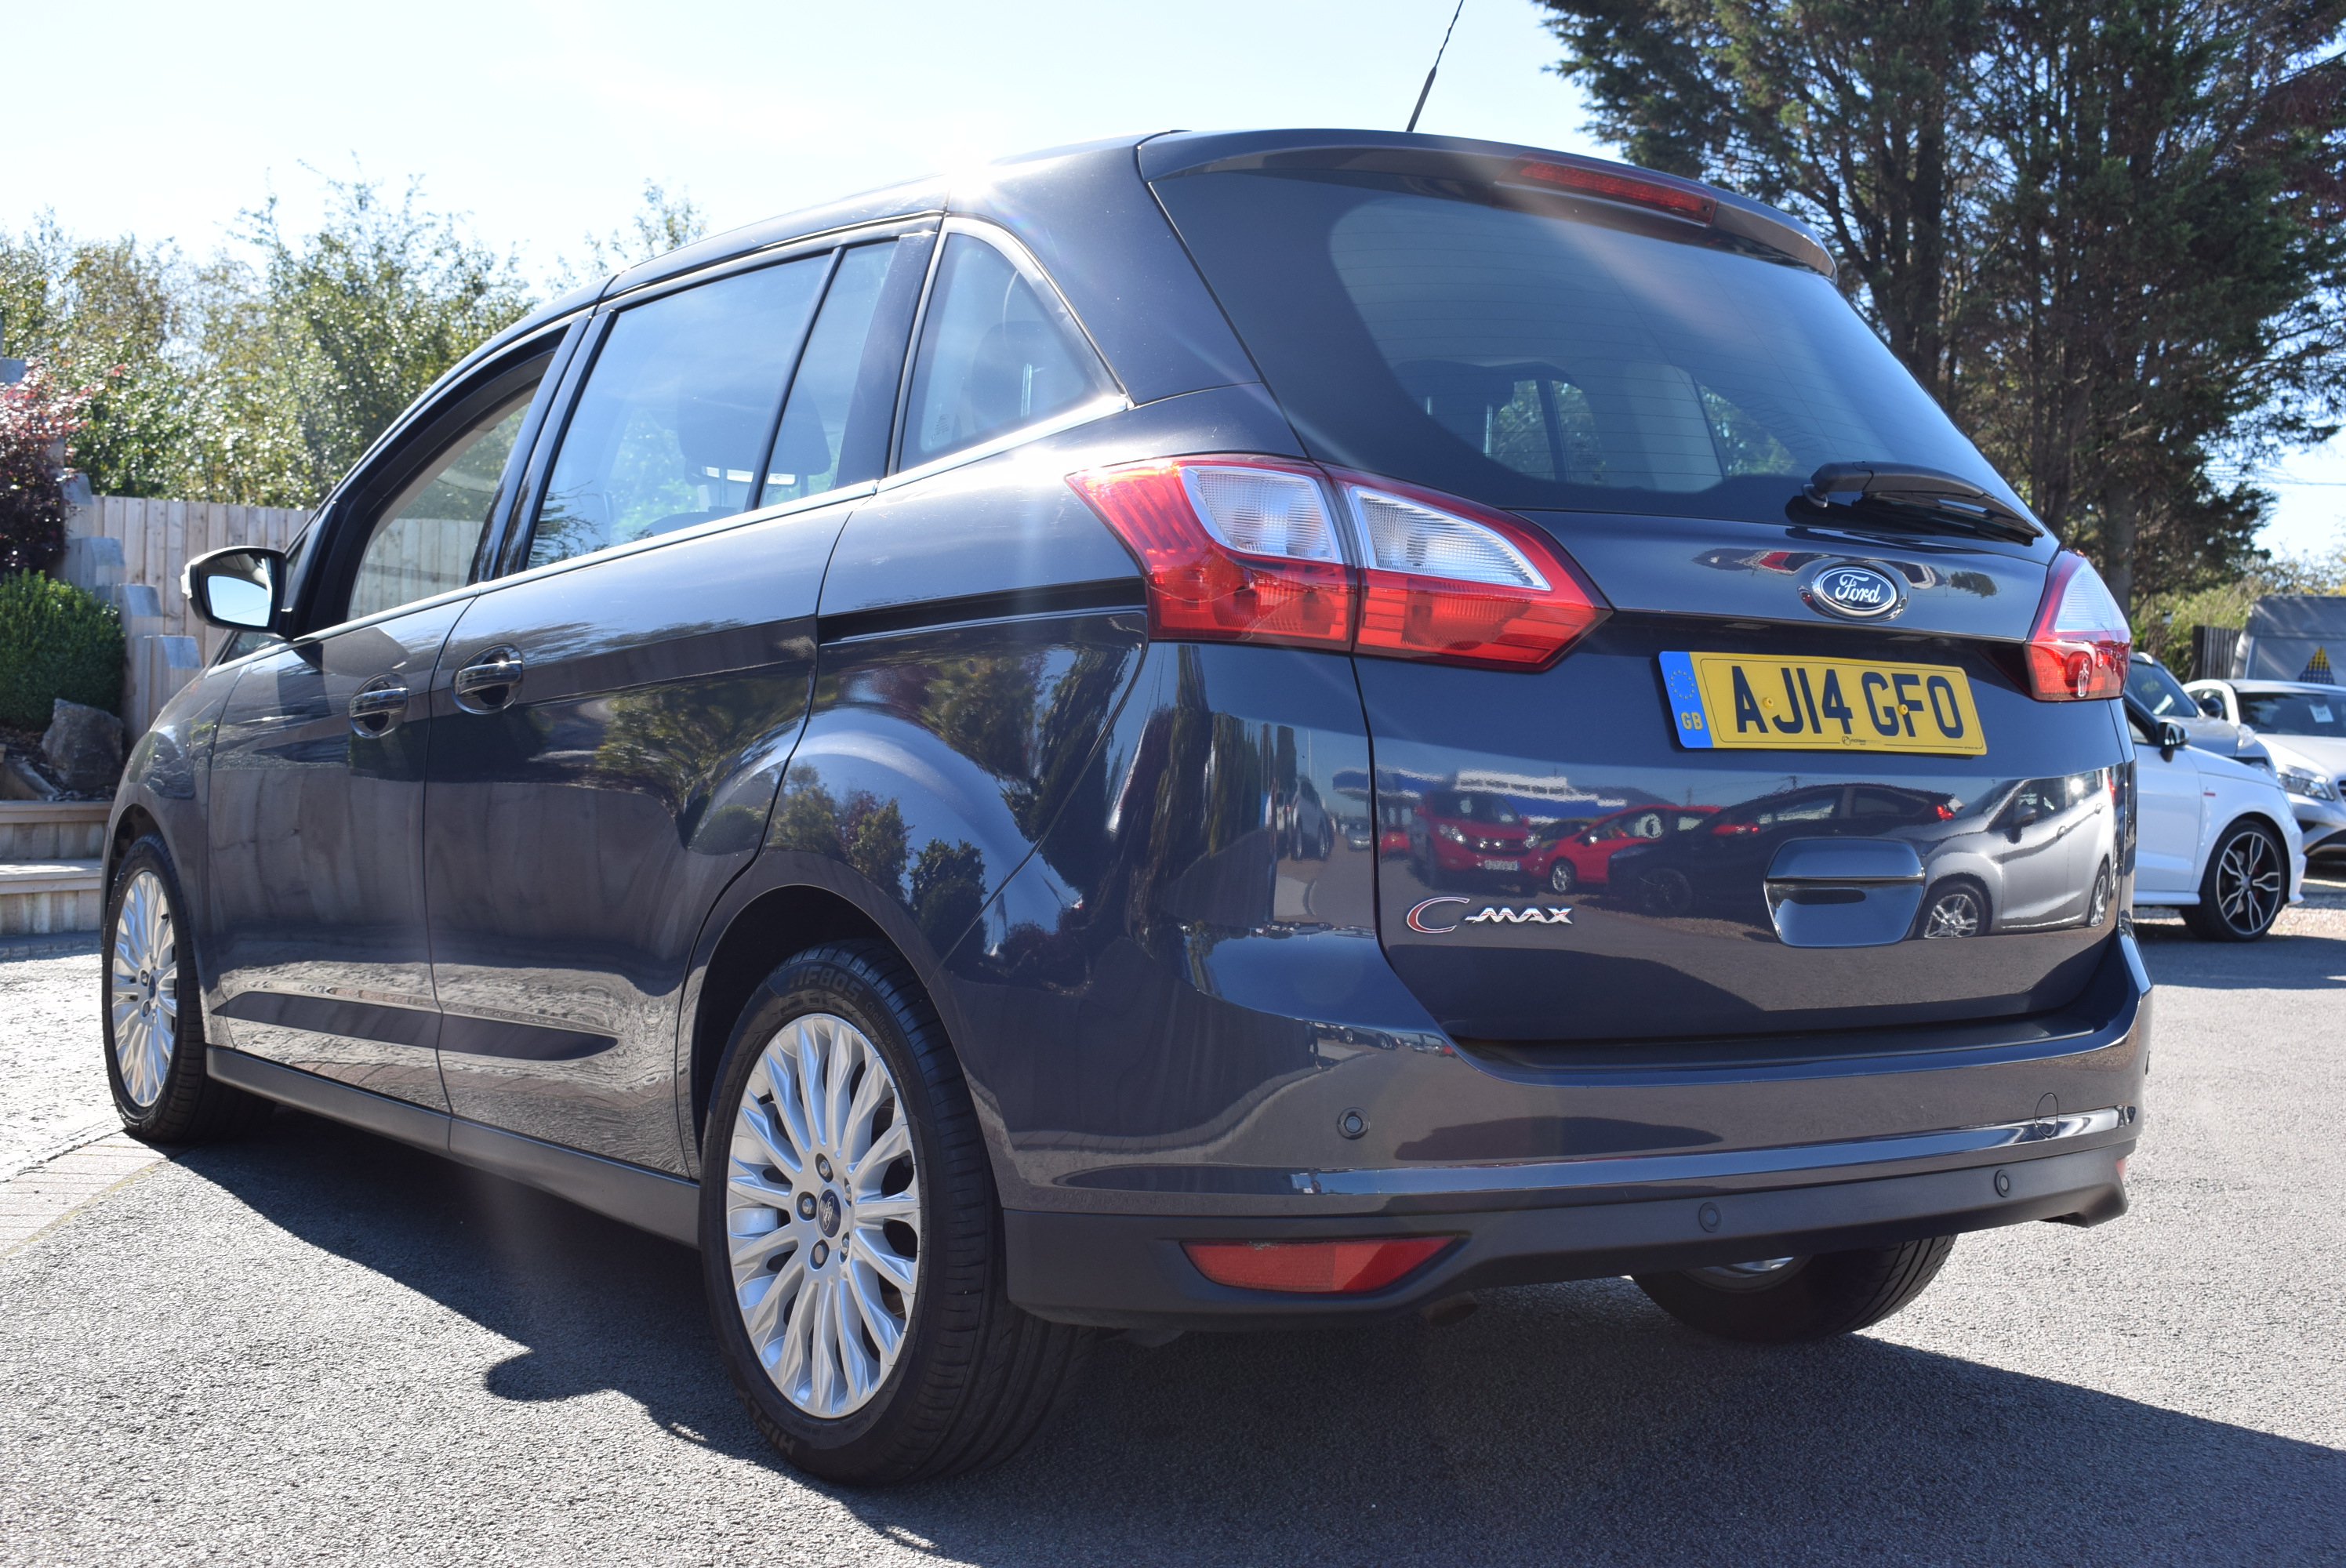 FORD GRAND CMAX 1.6 TDCi Titanium 5dr For Sale Richlee